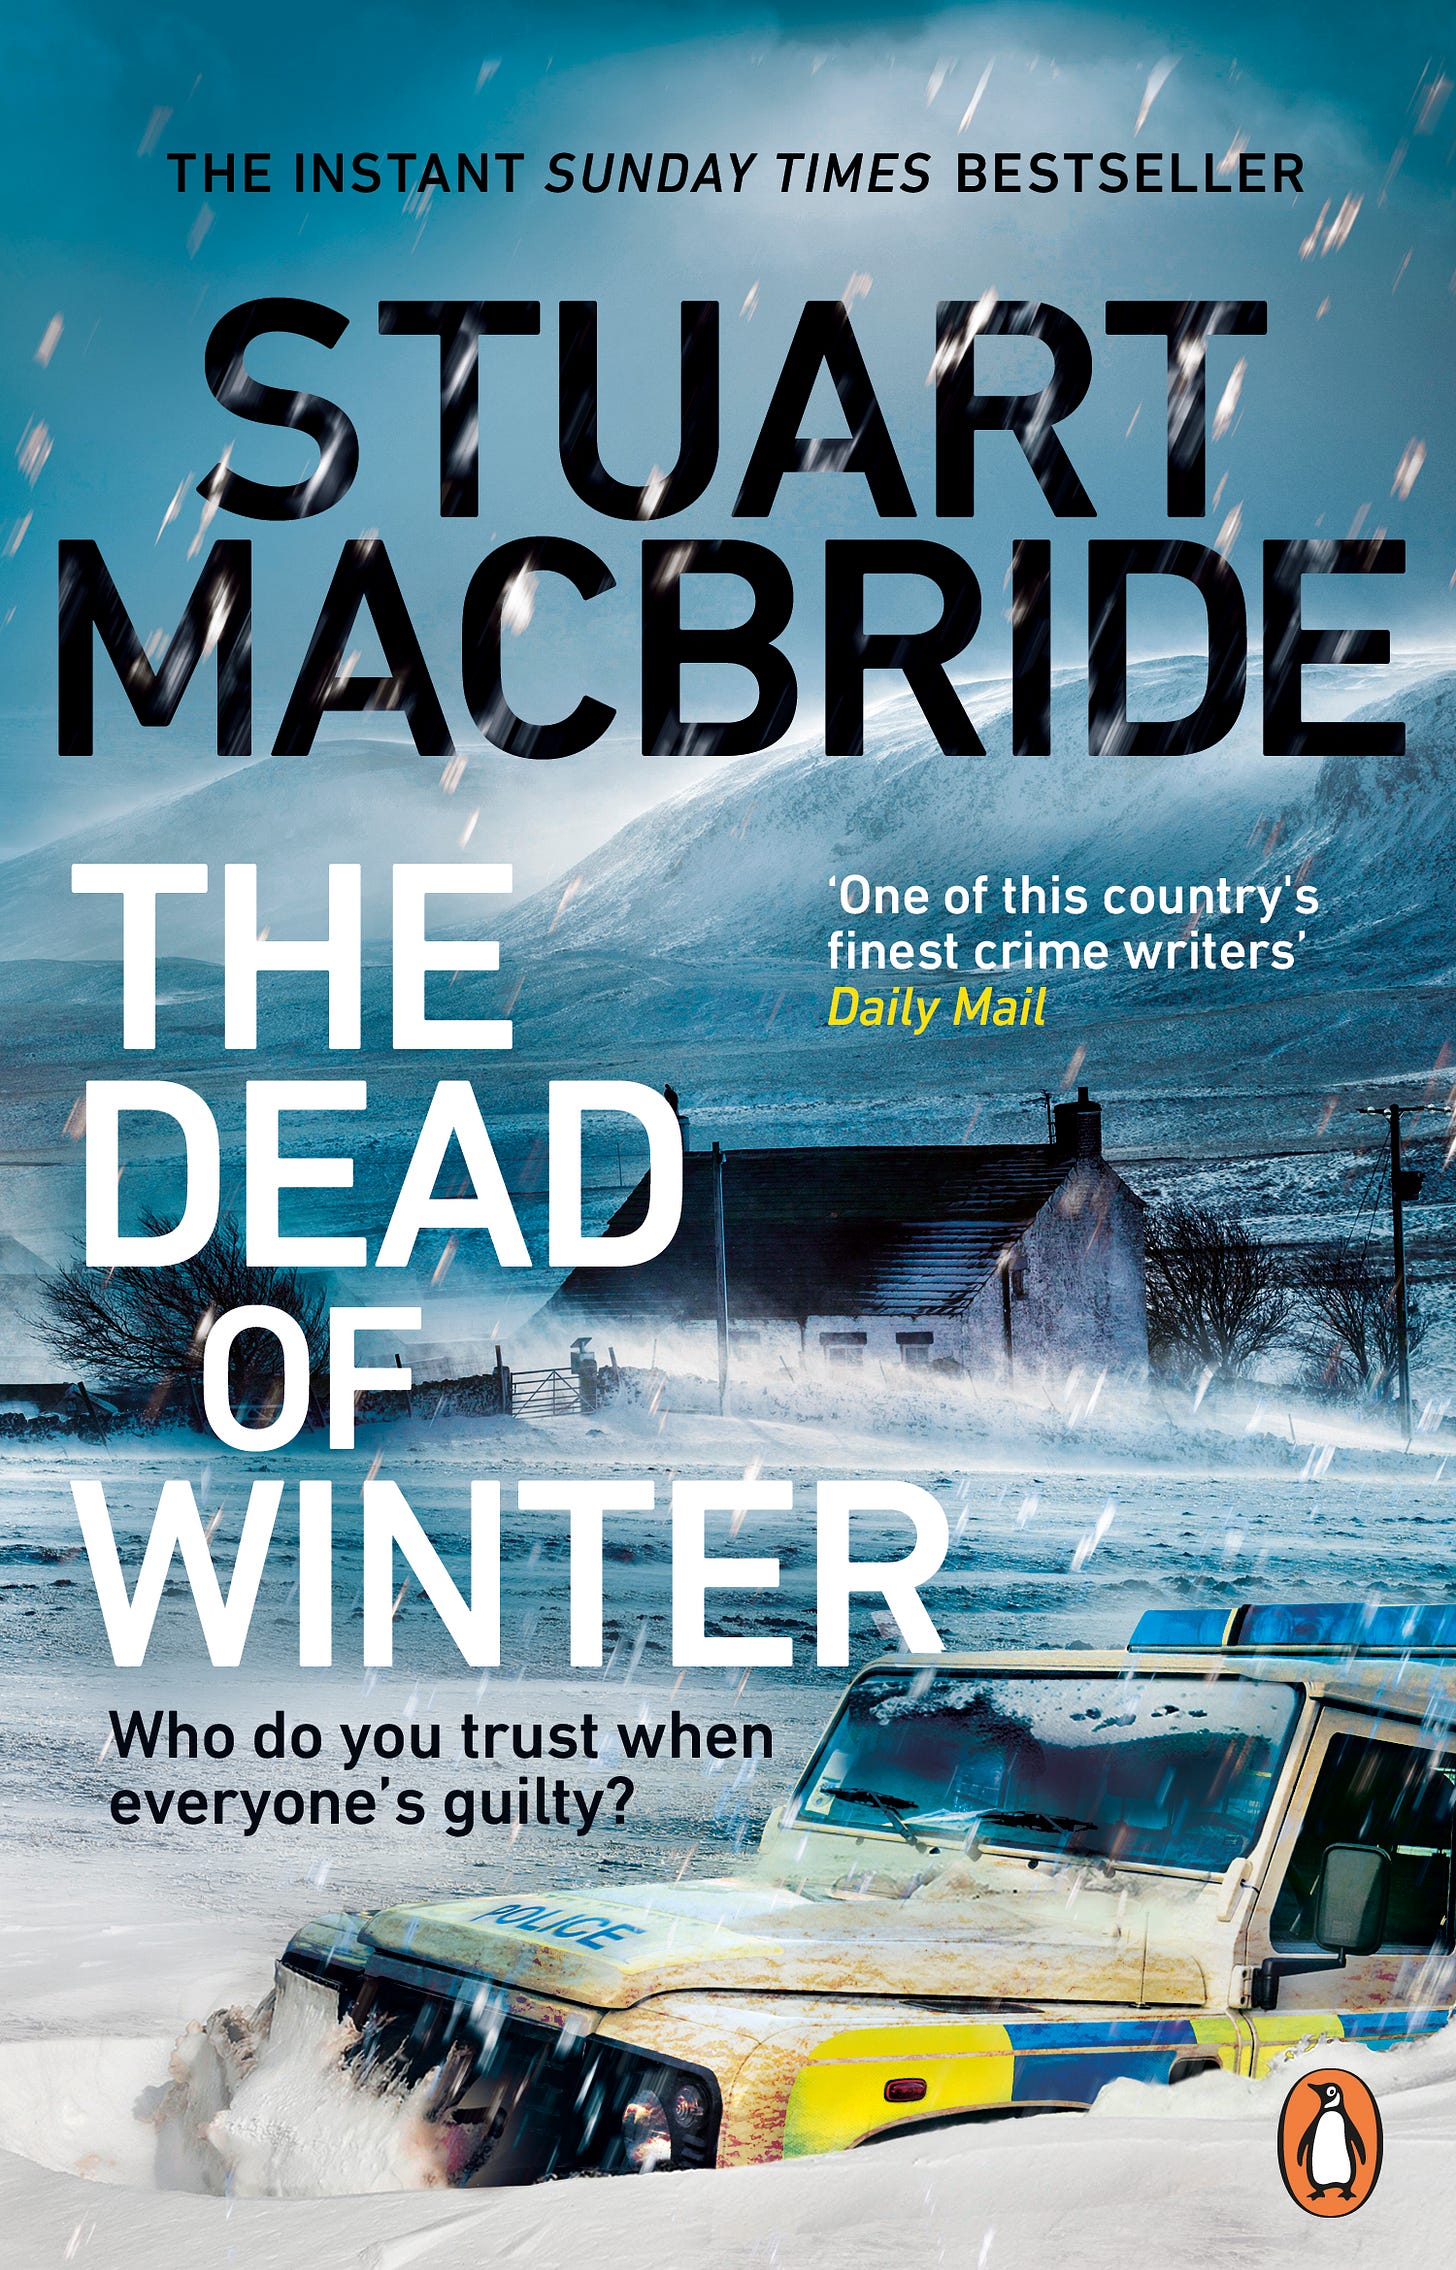 Book cover for Stuart's book: The Dead of Winter